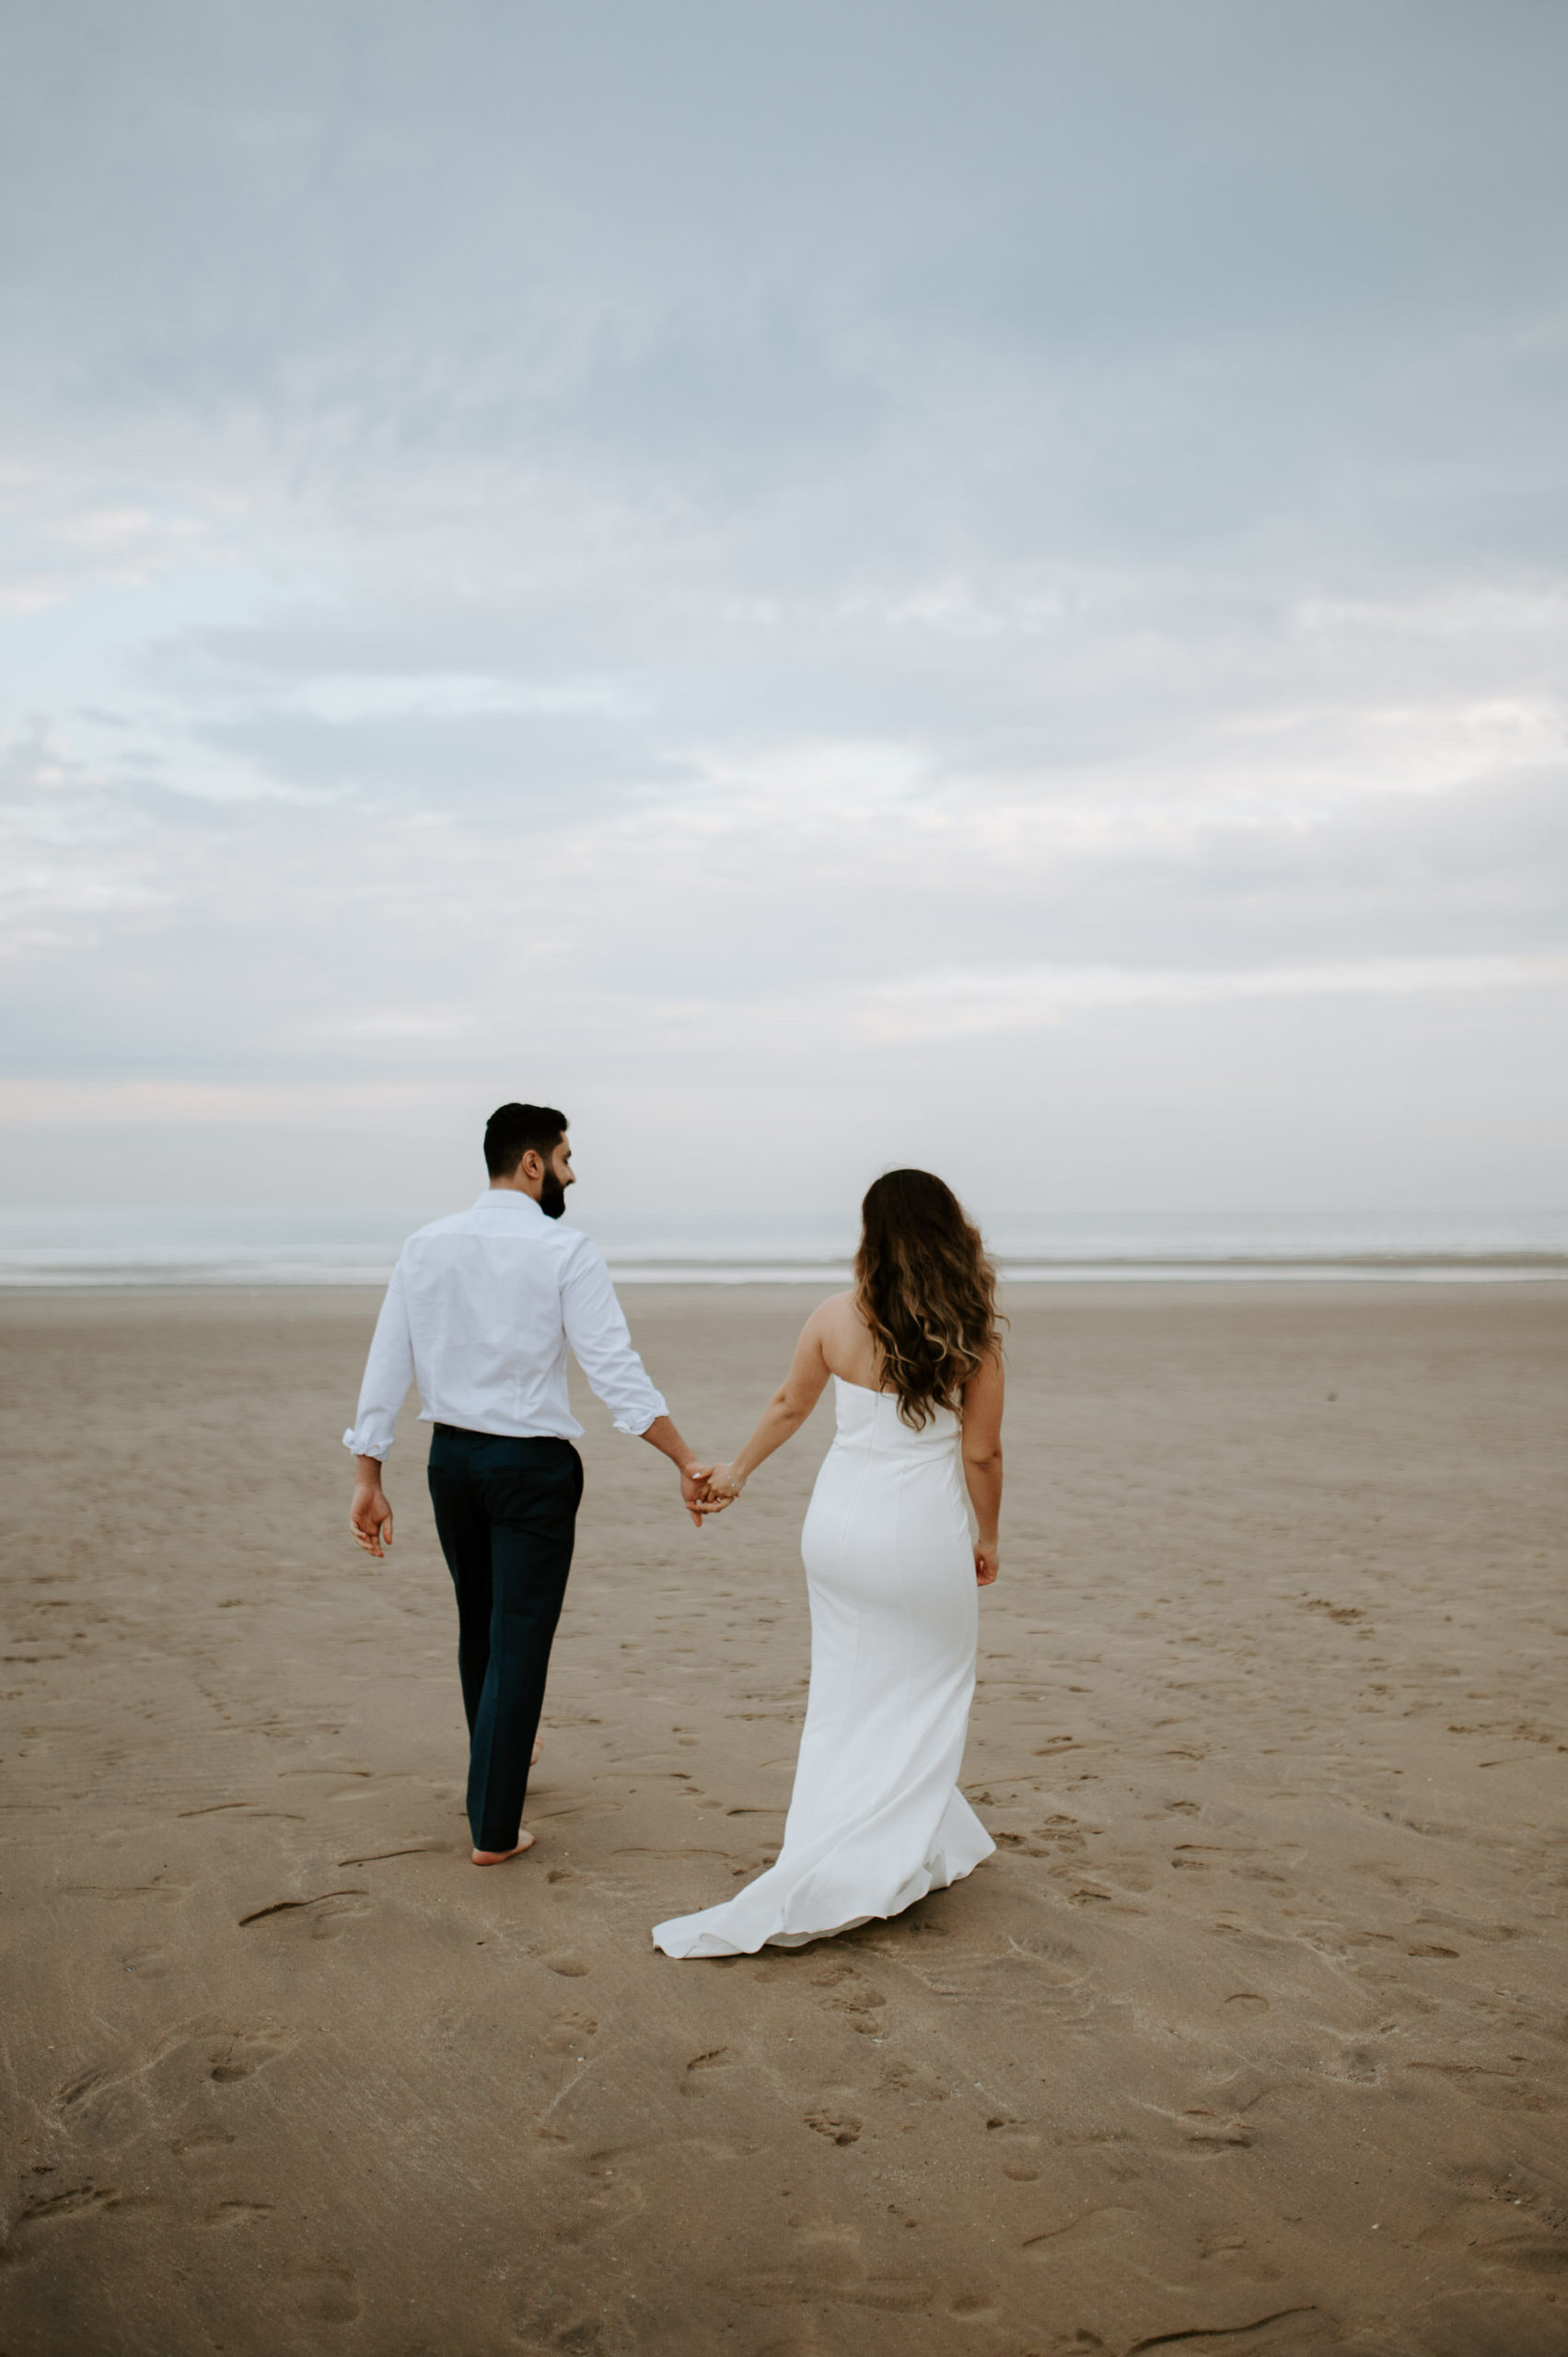 Demiana and Goergeuos - Camber Sands Golden Hour Beach Shoot - Laura Williams Photography-14.jpg